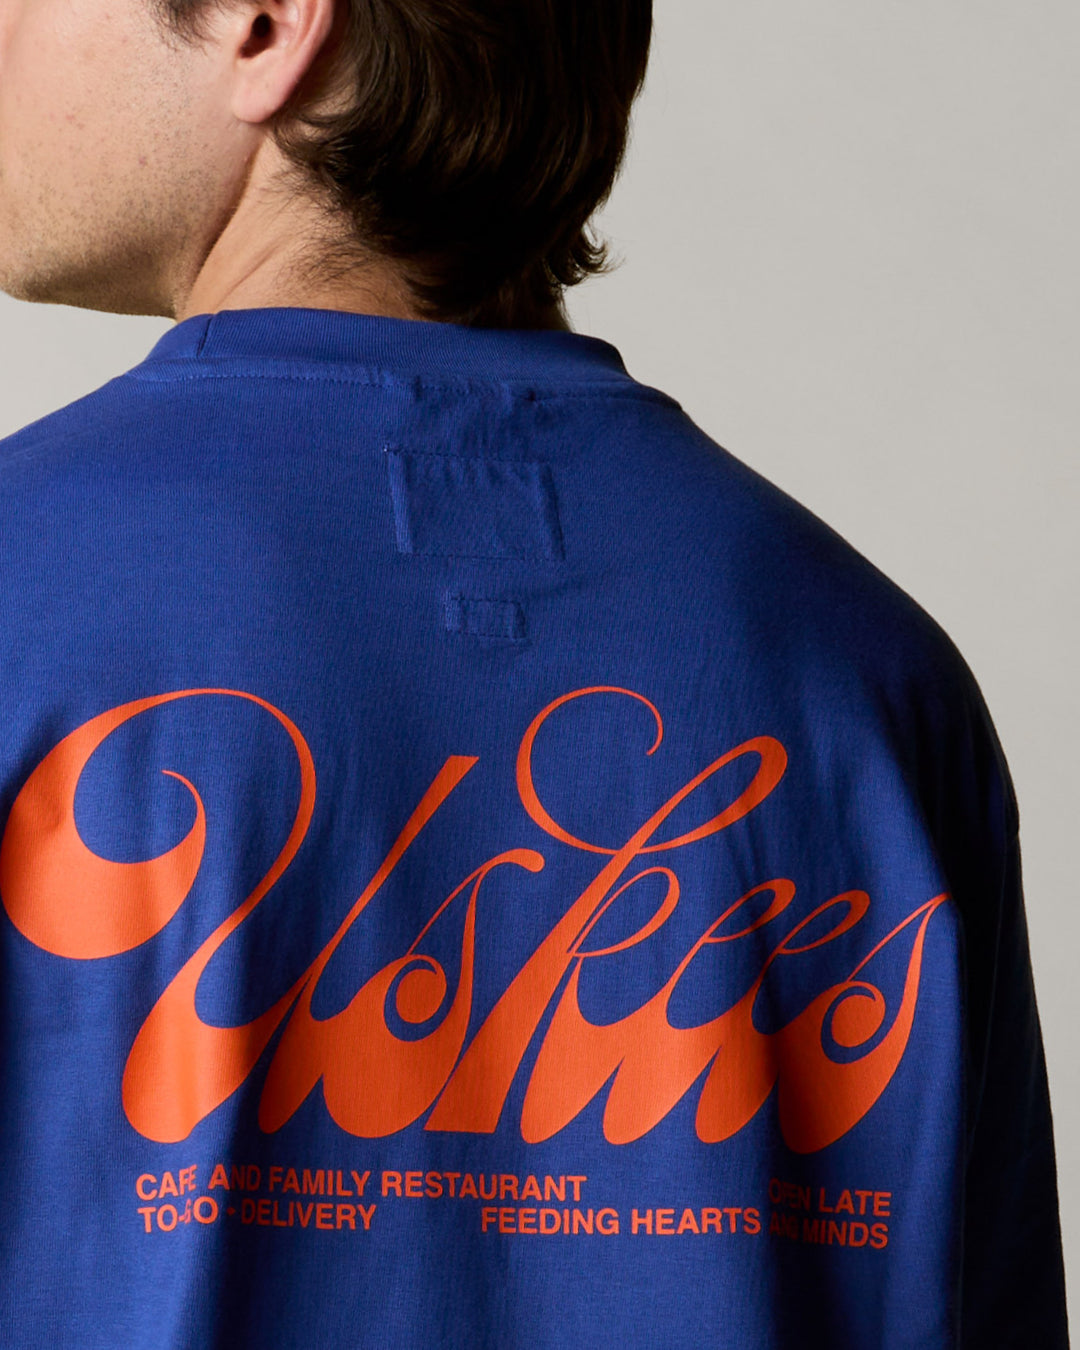 back view close up shot of model wearing  the uskees men's graphic Tee in ultra blue showing the 'diner' logo in orange